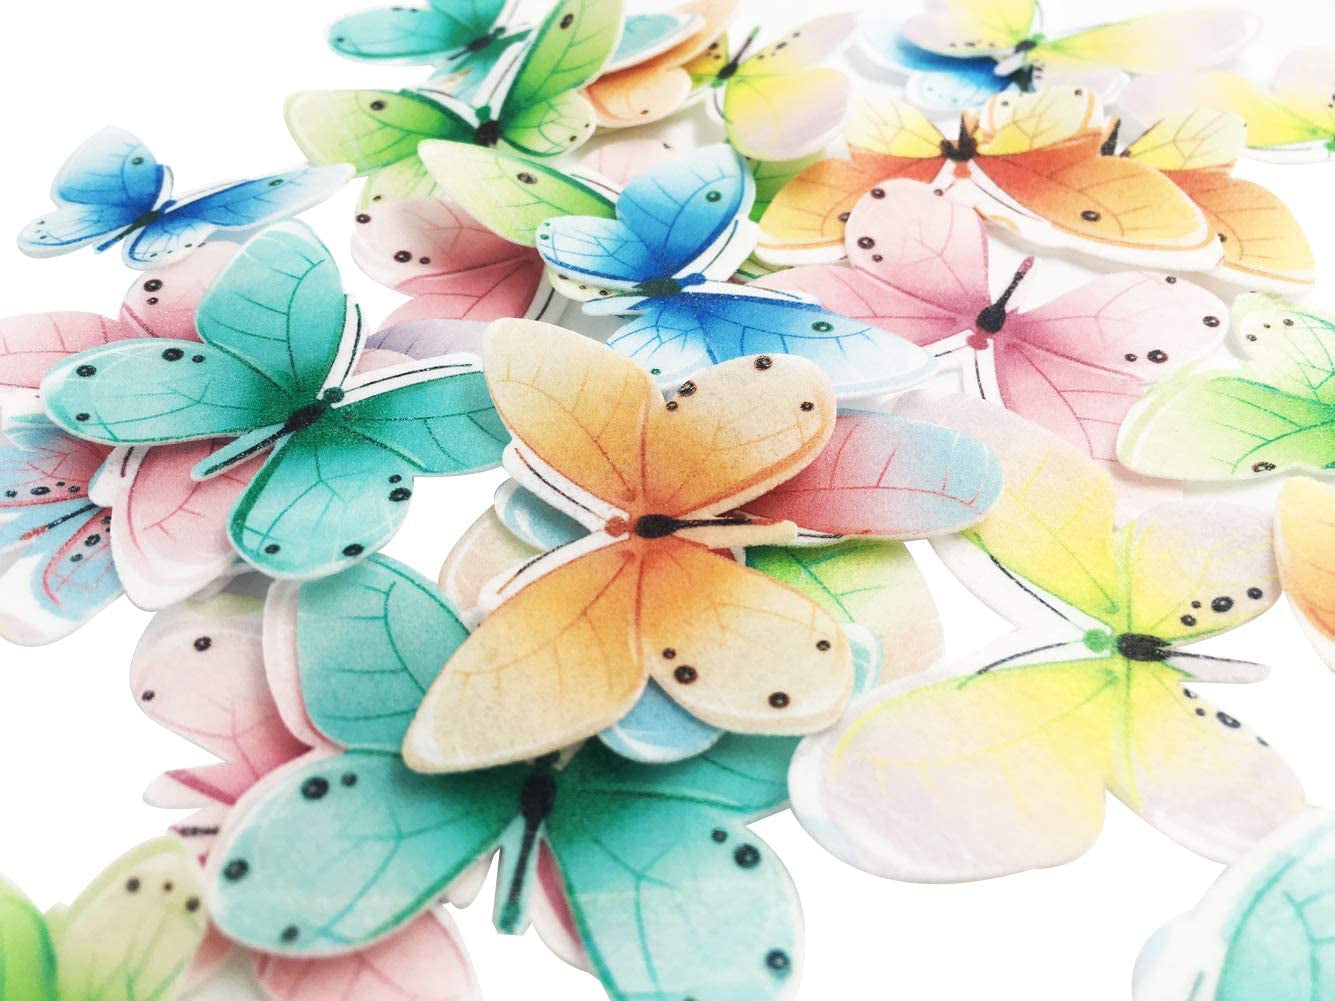 Set of 30 Edible Butterfly Cupcake Toppers 